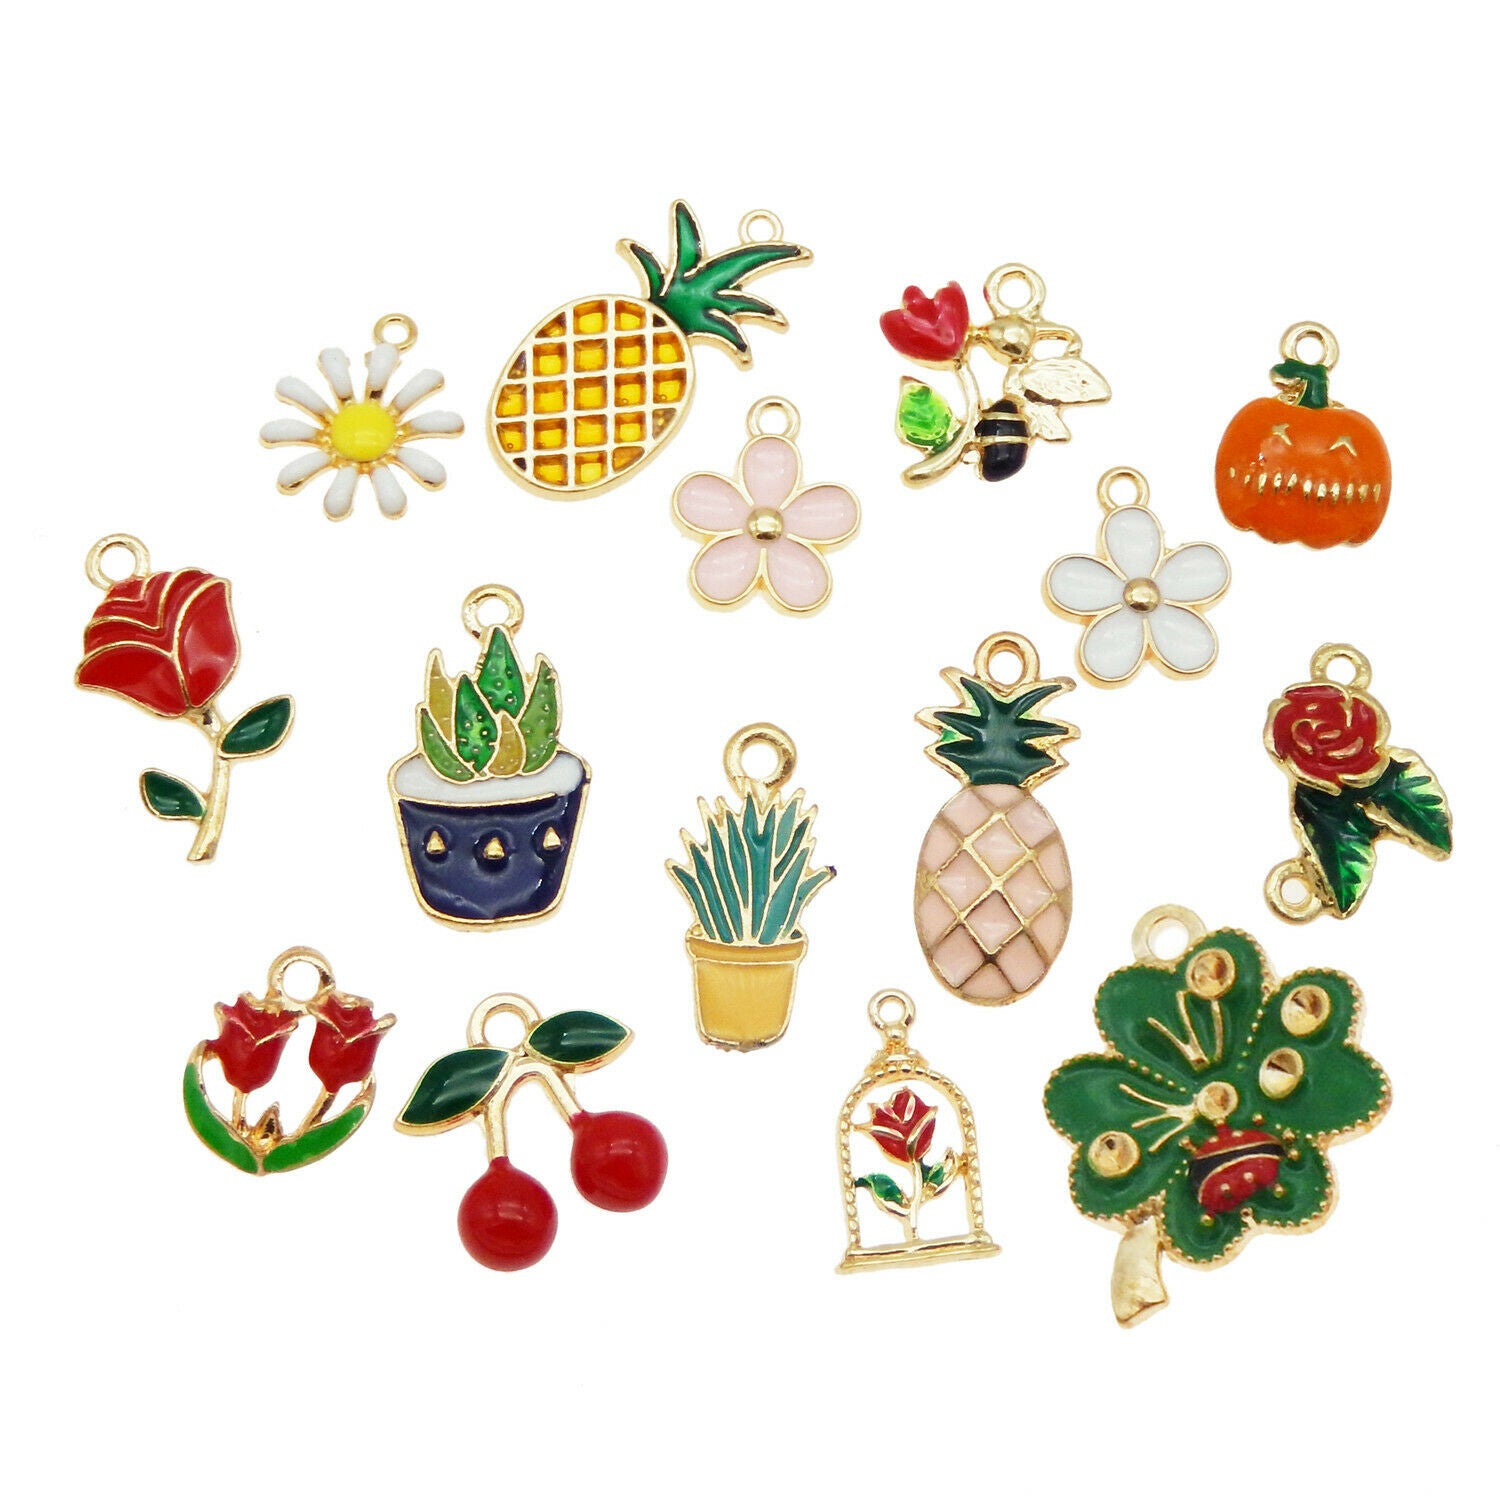 10 Mix Enamel Flowers Fruits Plants Charms Alloy Pendant Keychain Jewelry Crafts